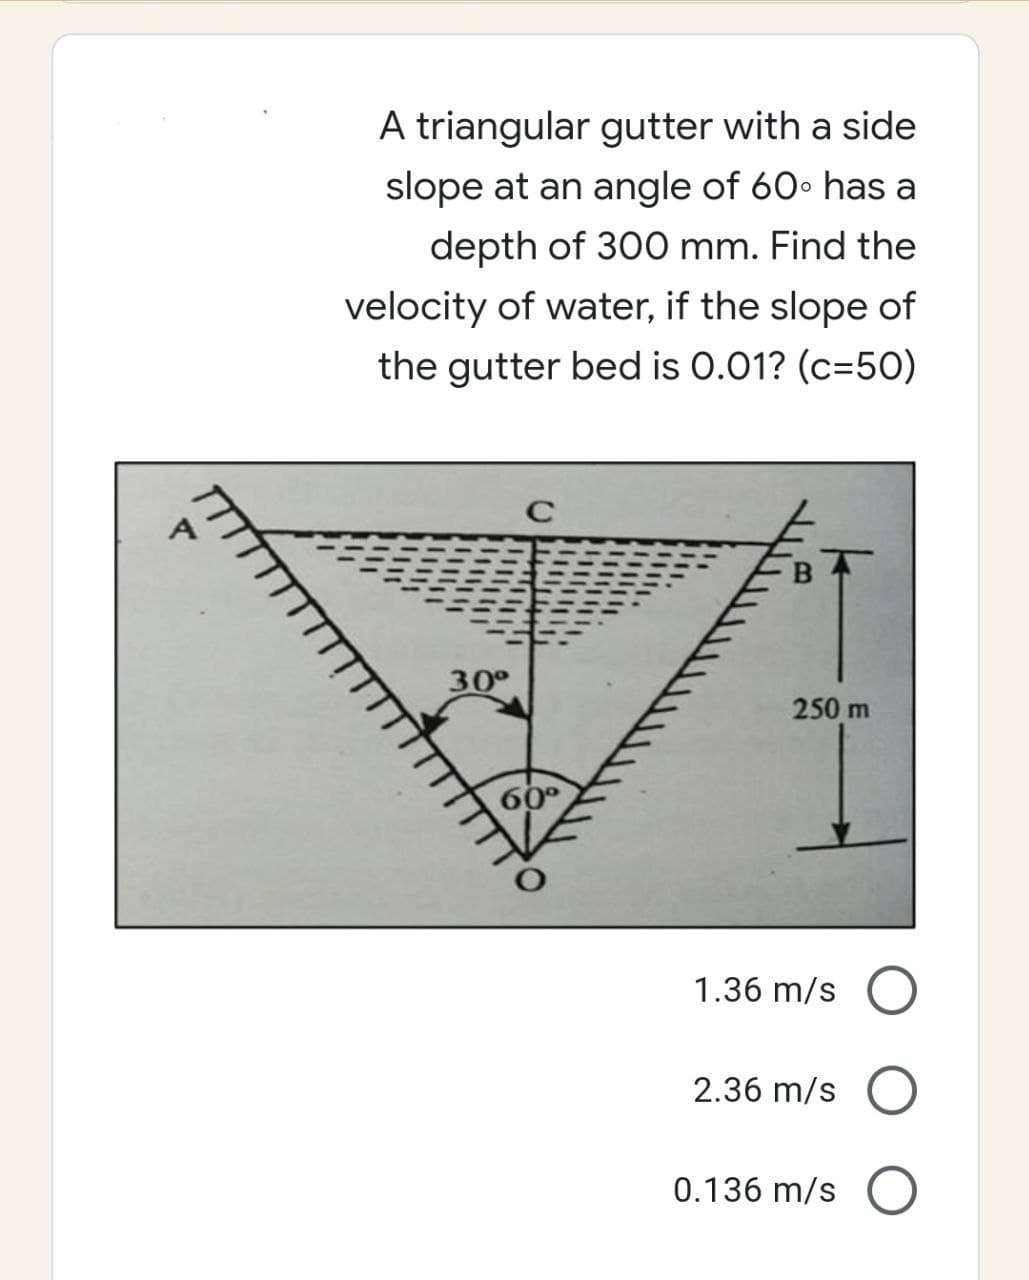 Pr
A triangular gutter with a side
slope at an angle of 60° has a
depth of 300 mm. Find the
velocity of water, if the slope of
the gutter bed is 0.01? (c=50)
C
250 m
30°
60°
1.36 m/s
2.36 m/s
0.136 m/s O